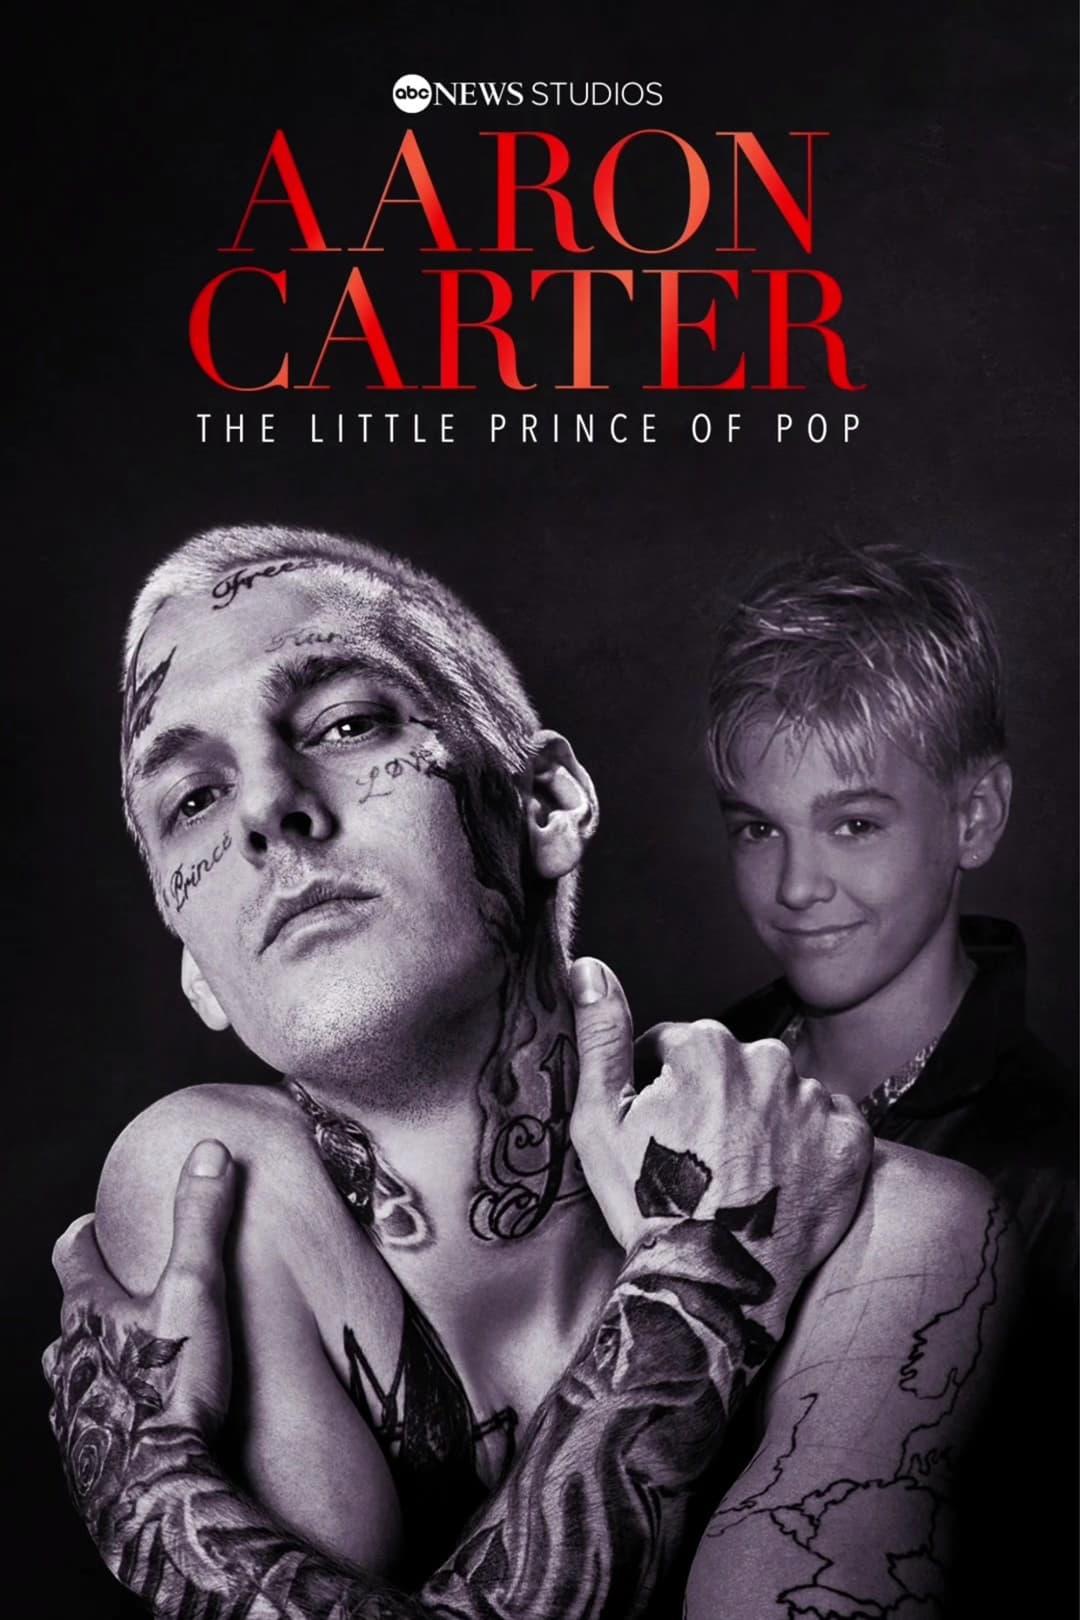 Aaron Carter: The Little Prince of Pop poster